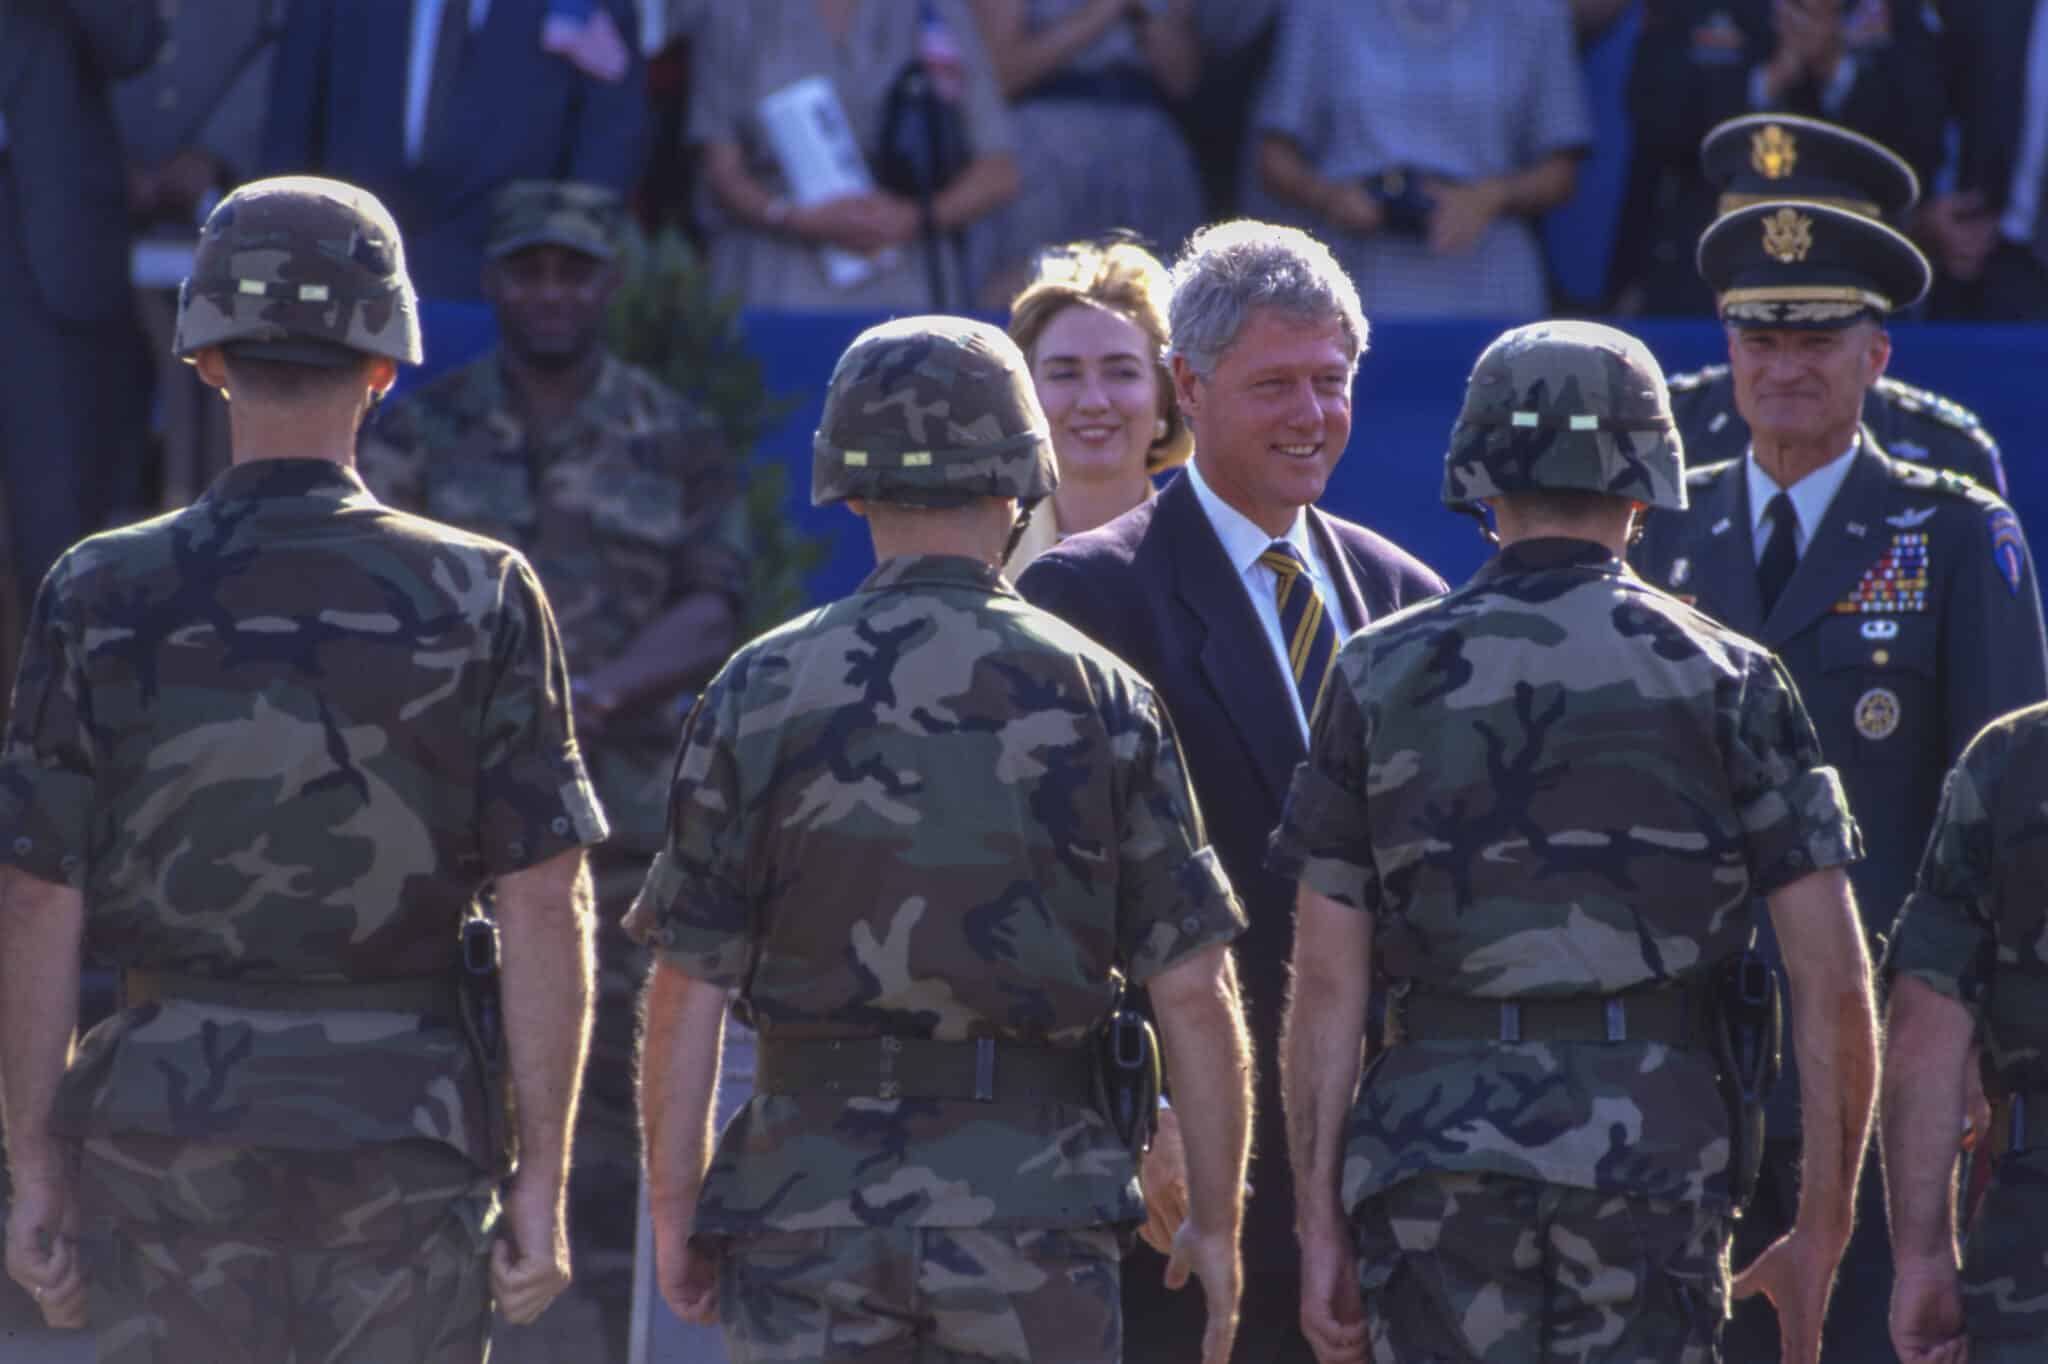 Bill Clinton walking past military personnel